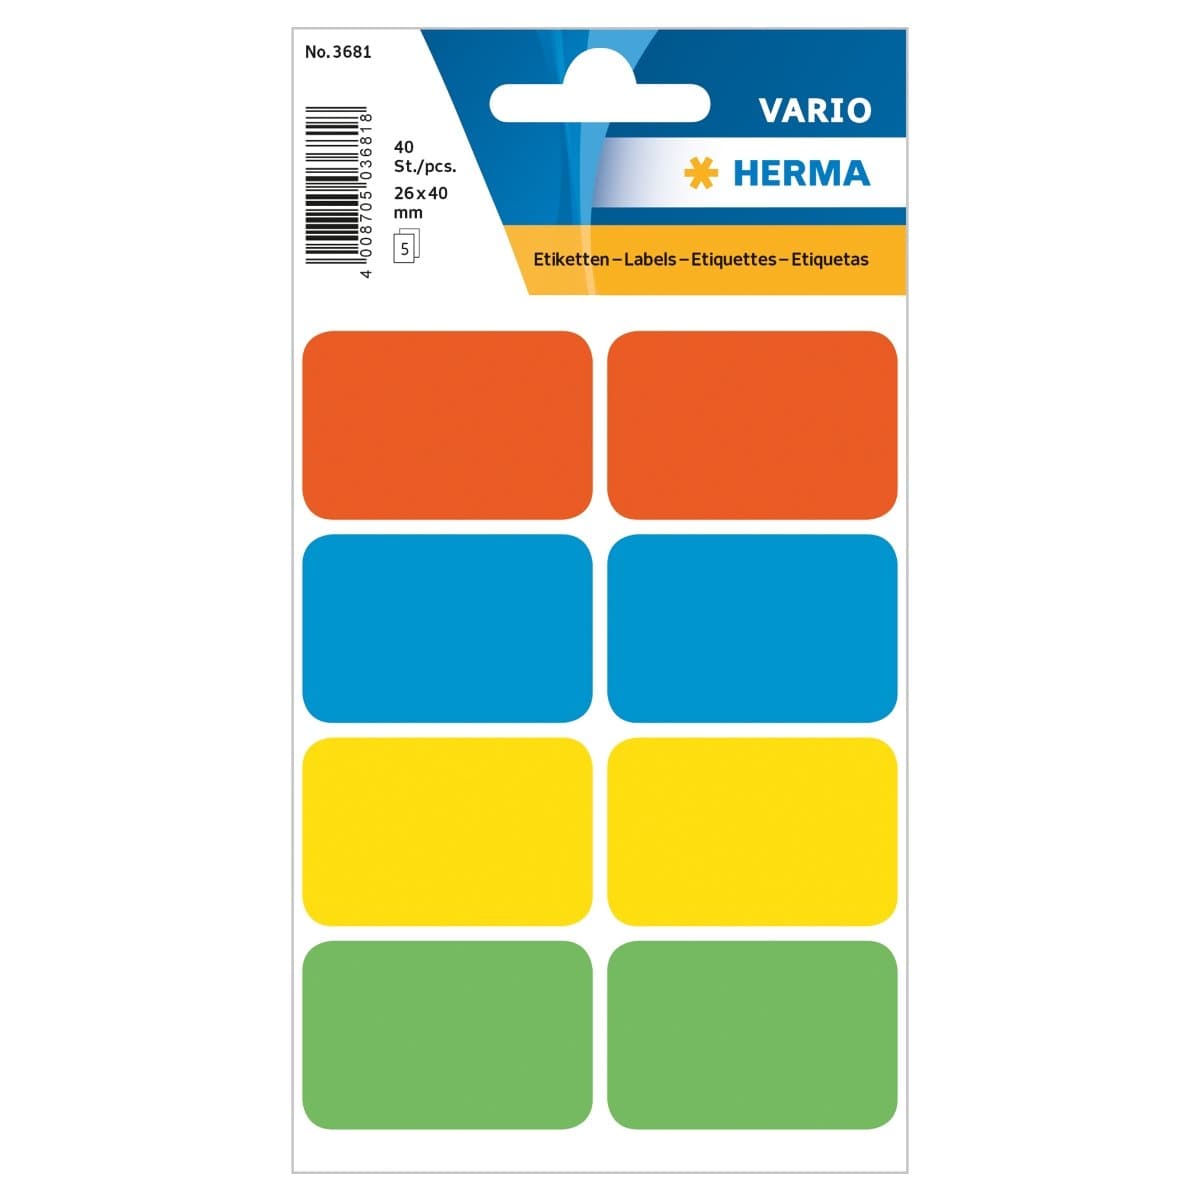 Herma Vario Sticker Labels, 26 x 40 mm, 40/pack, Assorted Colors